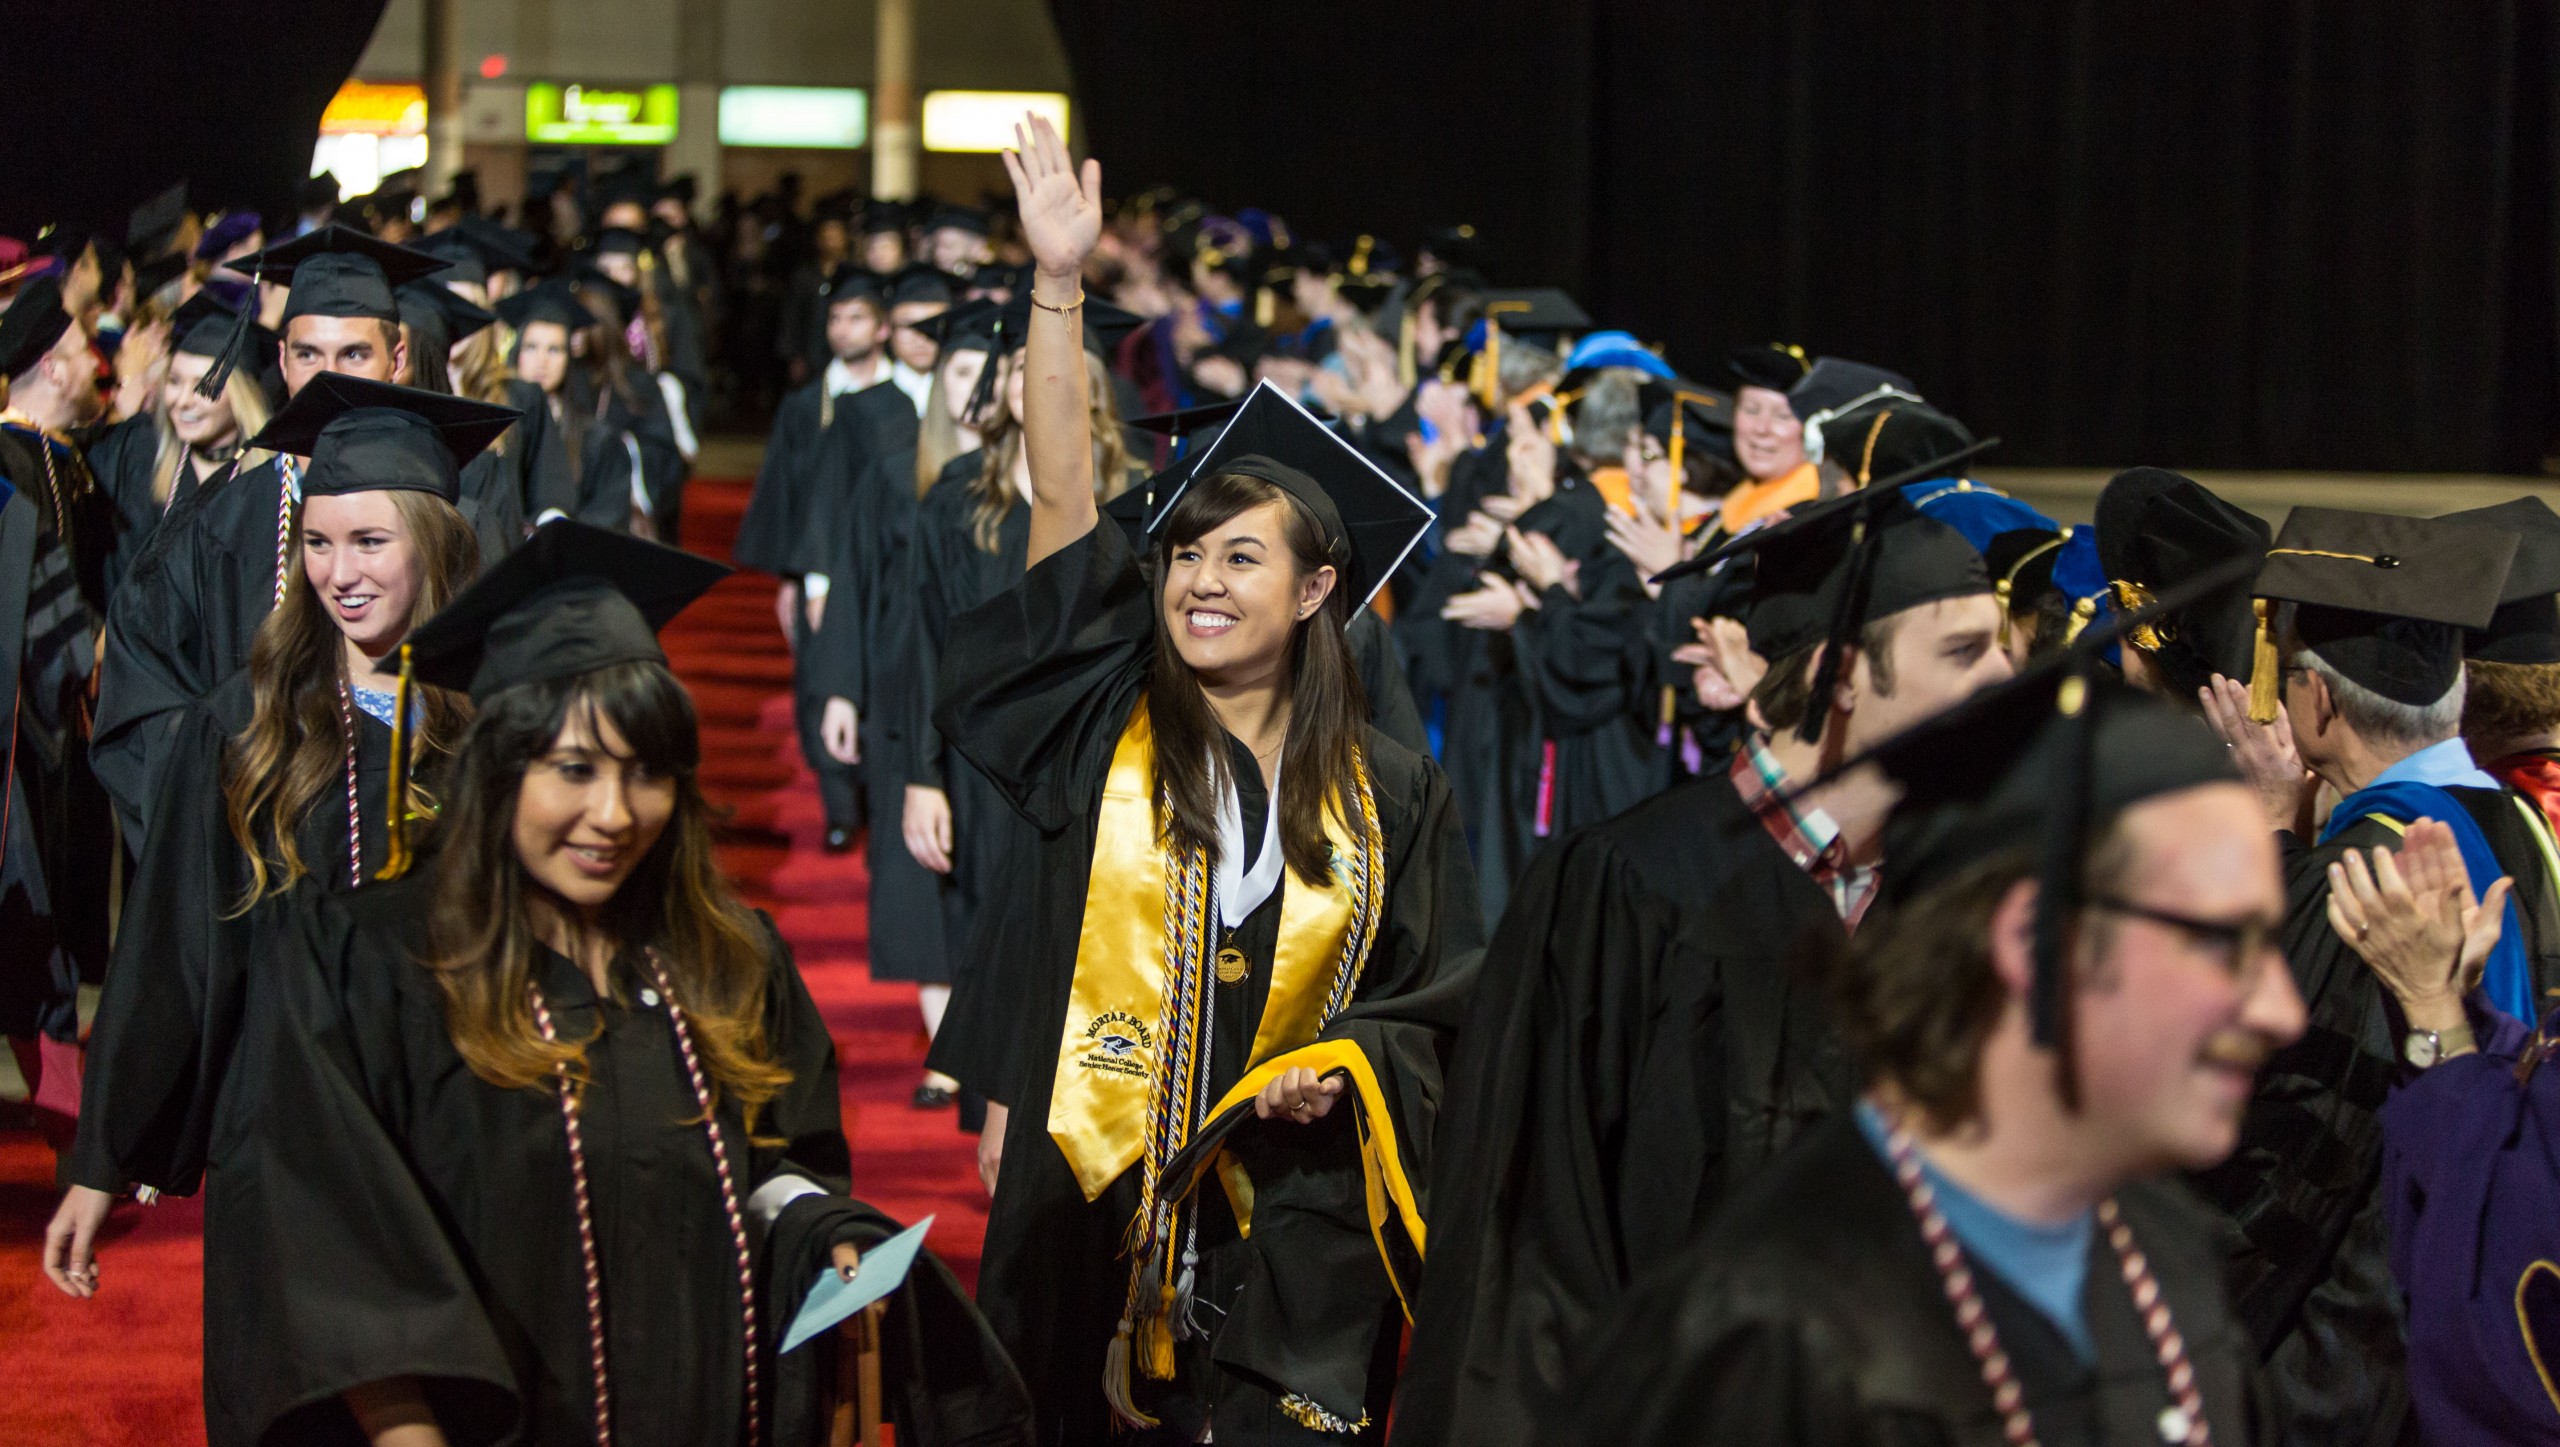 Students celebrate the culmination of their academic careers at Pacific Lutheran University with Commencement 2017 on Thursday, May 25, at the Tacoma Dome. (Photo by John Froschauer/PLU)